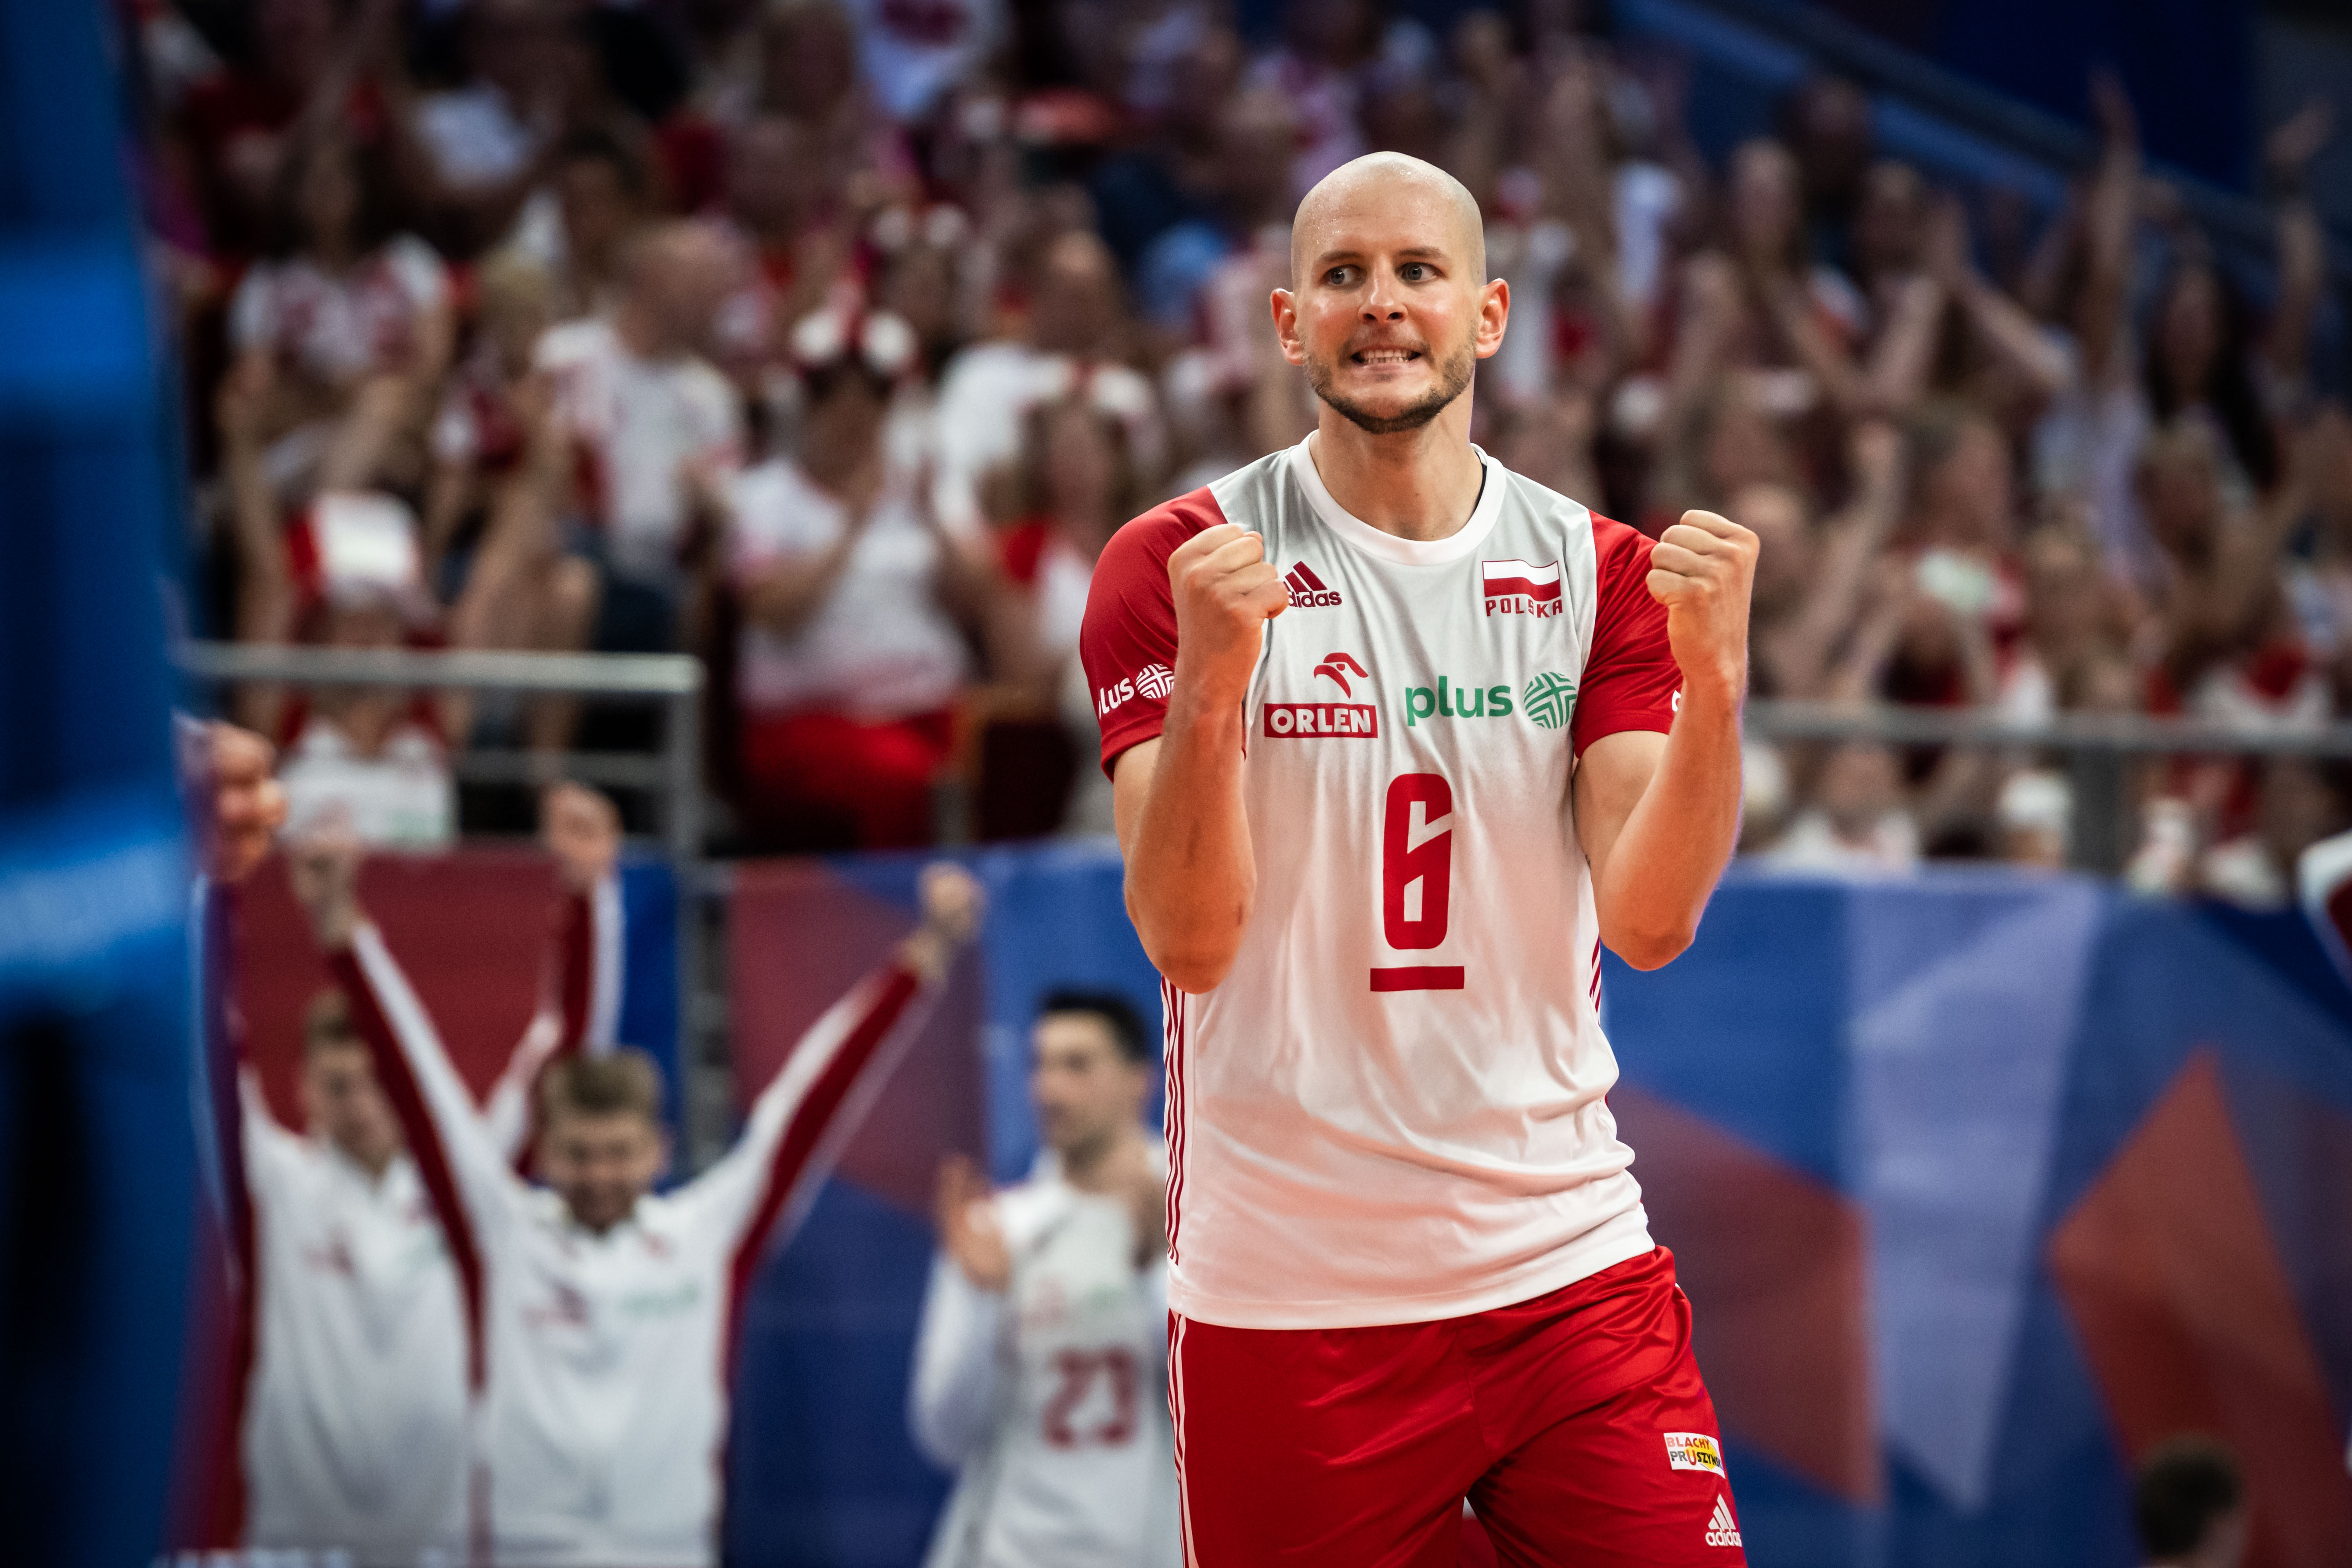 2022 Volleyball Men's World Championship draw unveiled